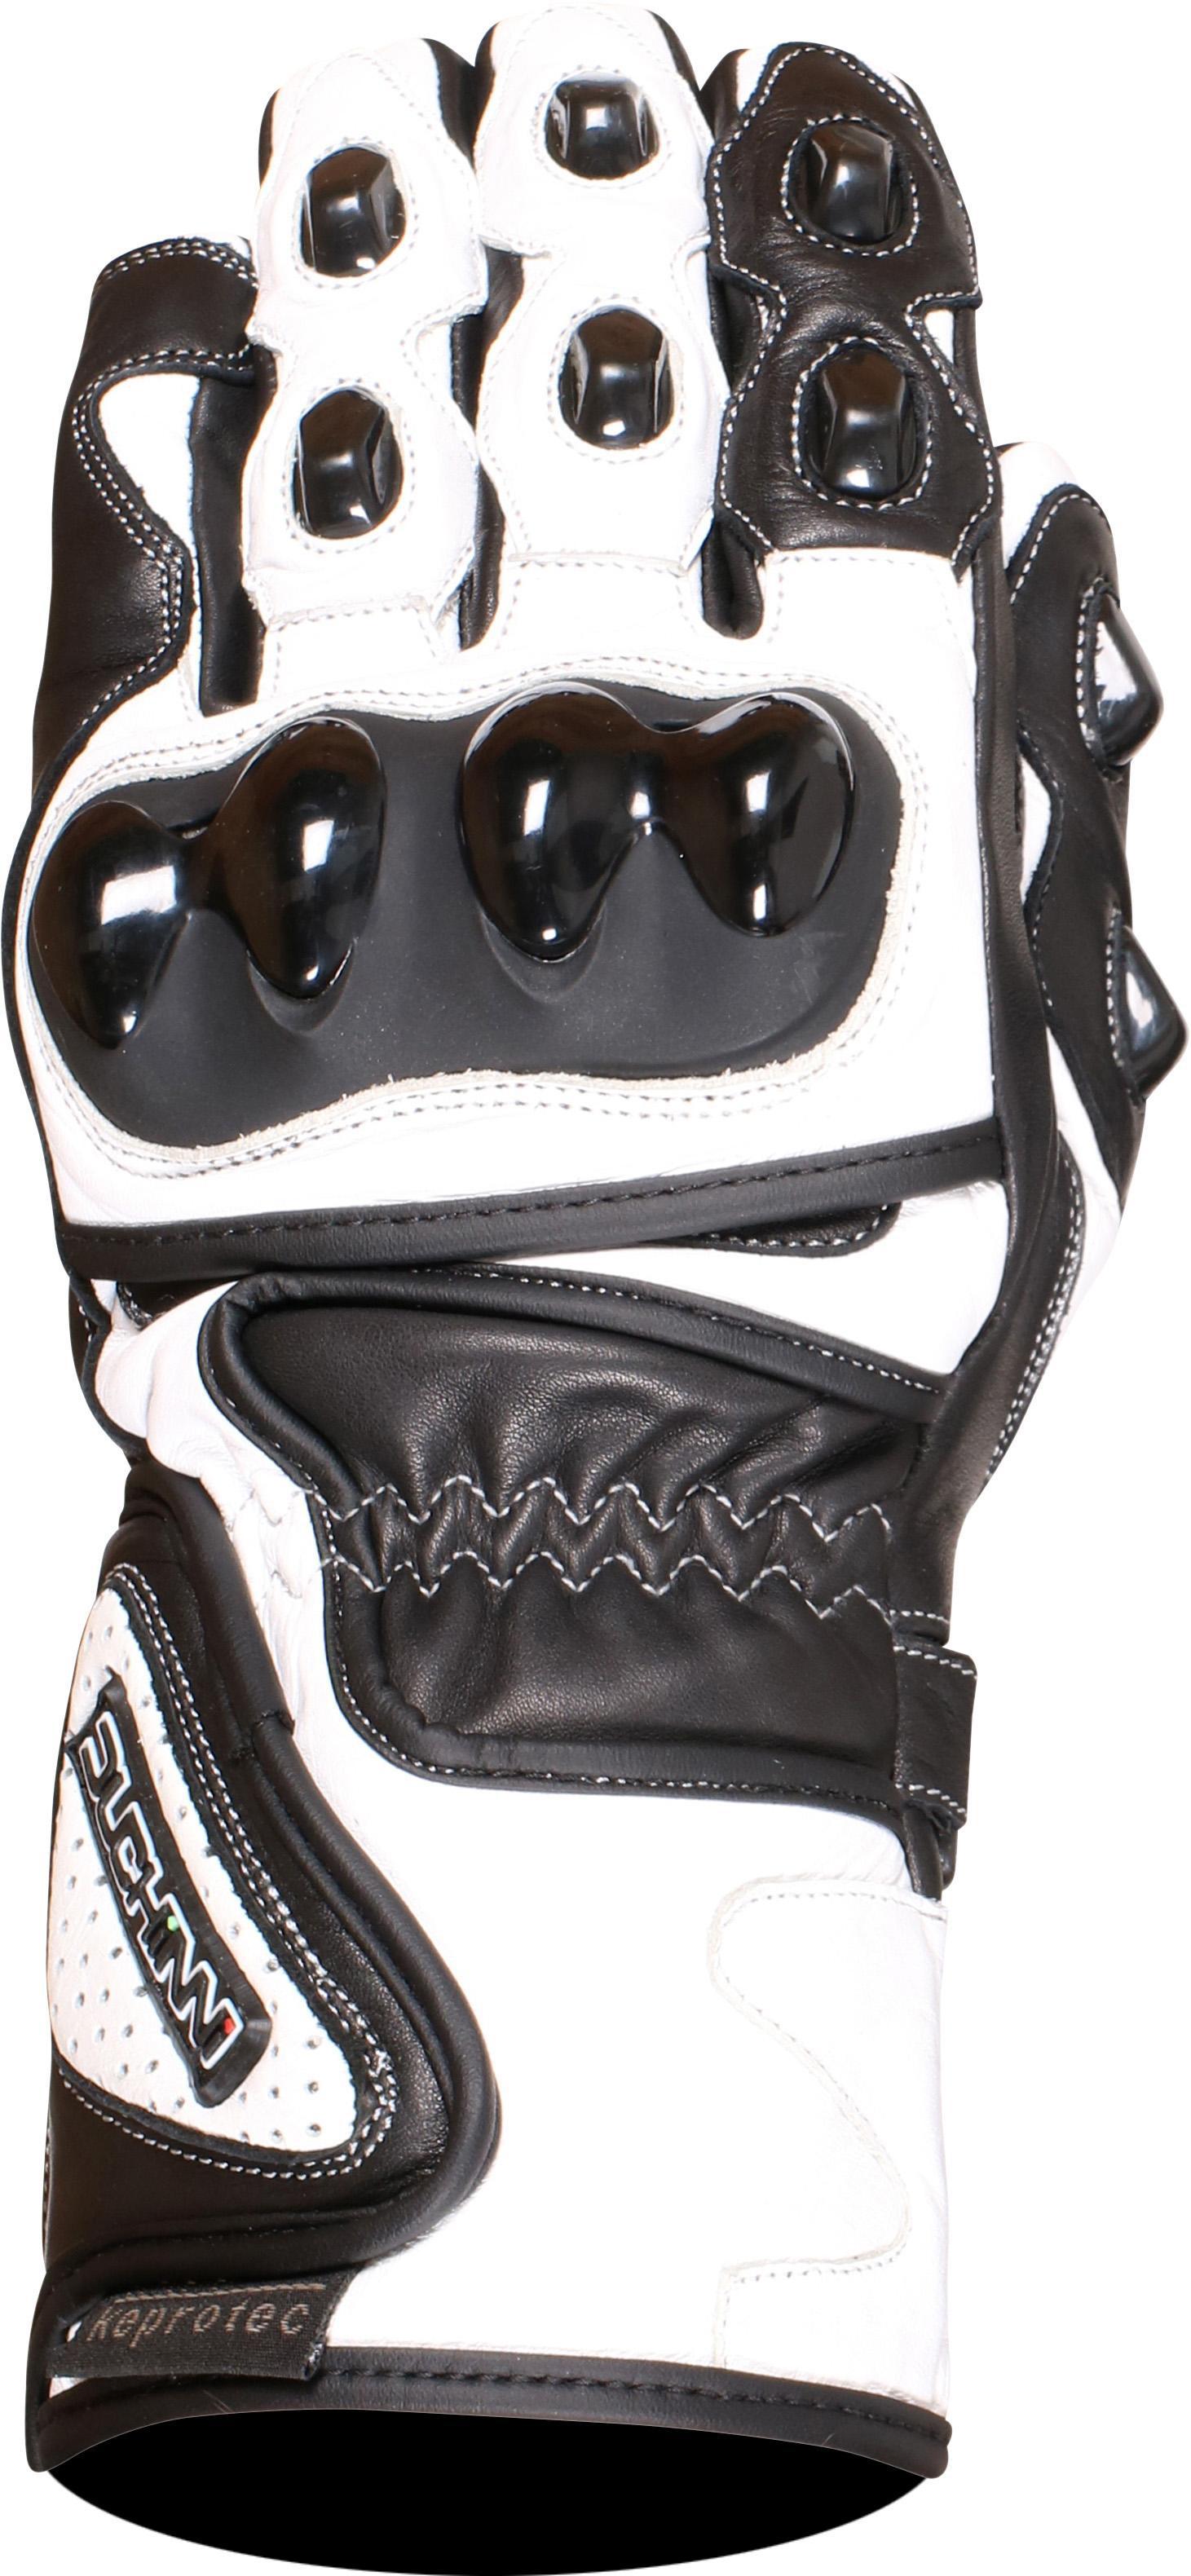 Duchinni Dr1 Motorcycle Gloves - Black And White, Xl